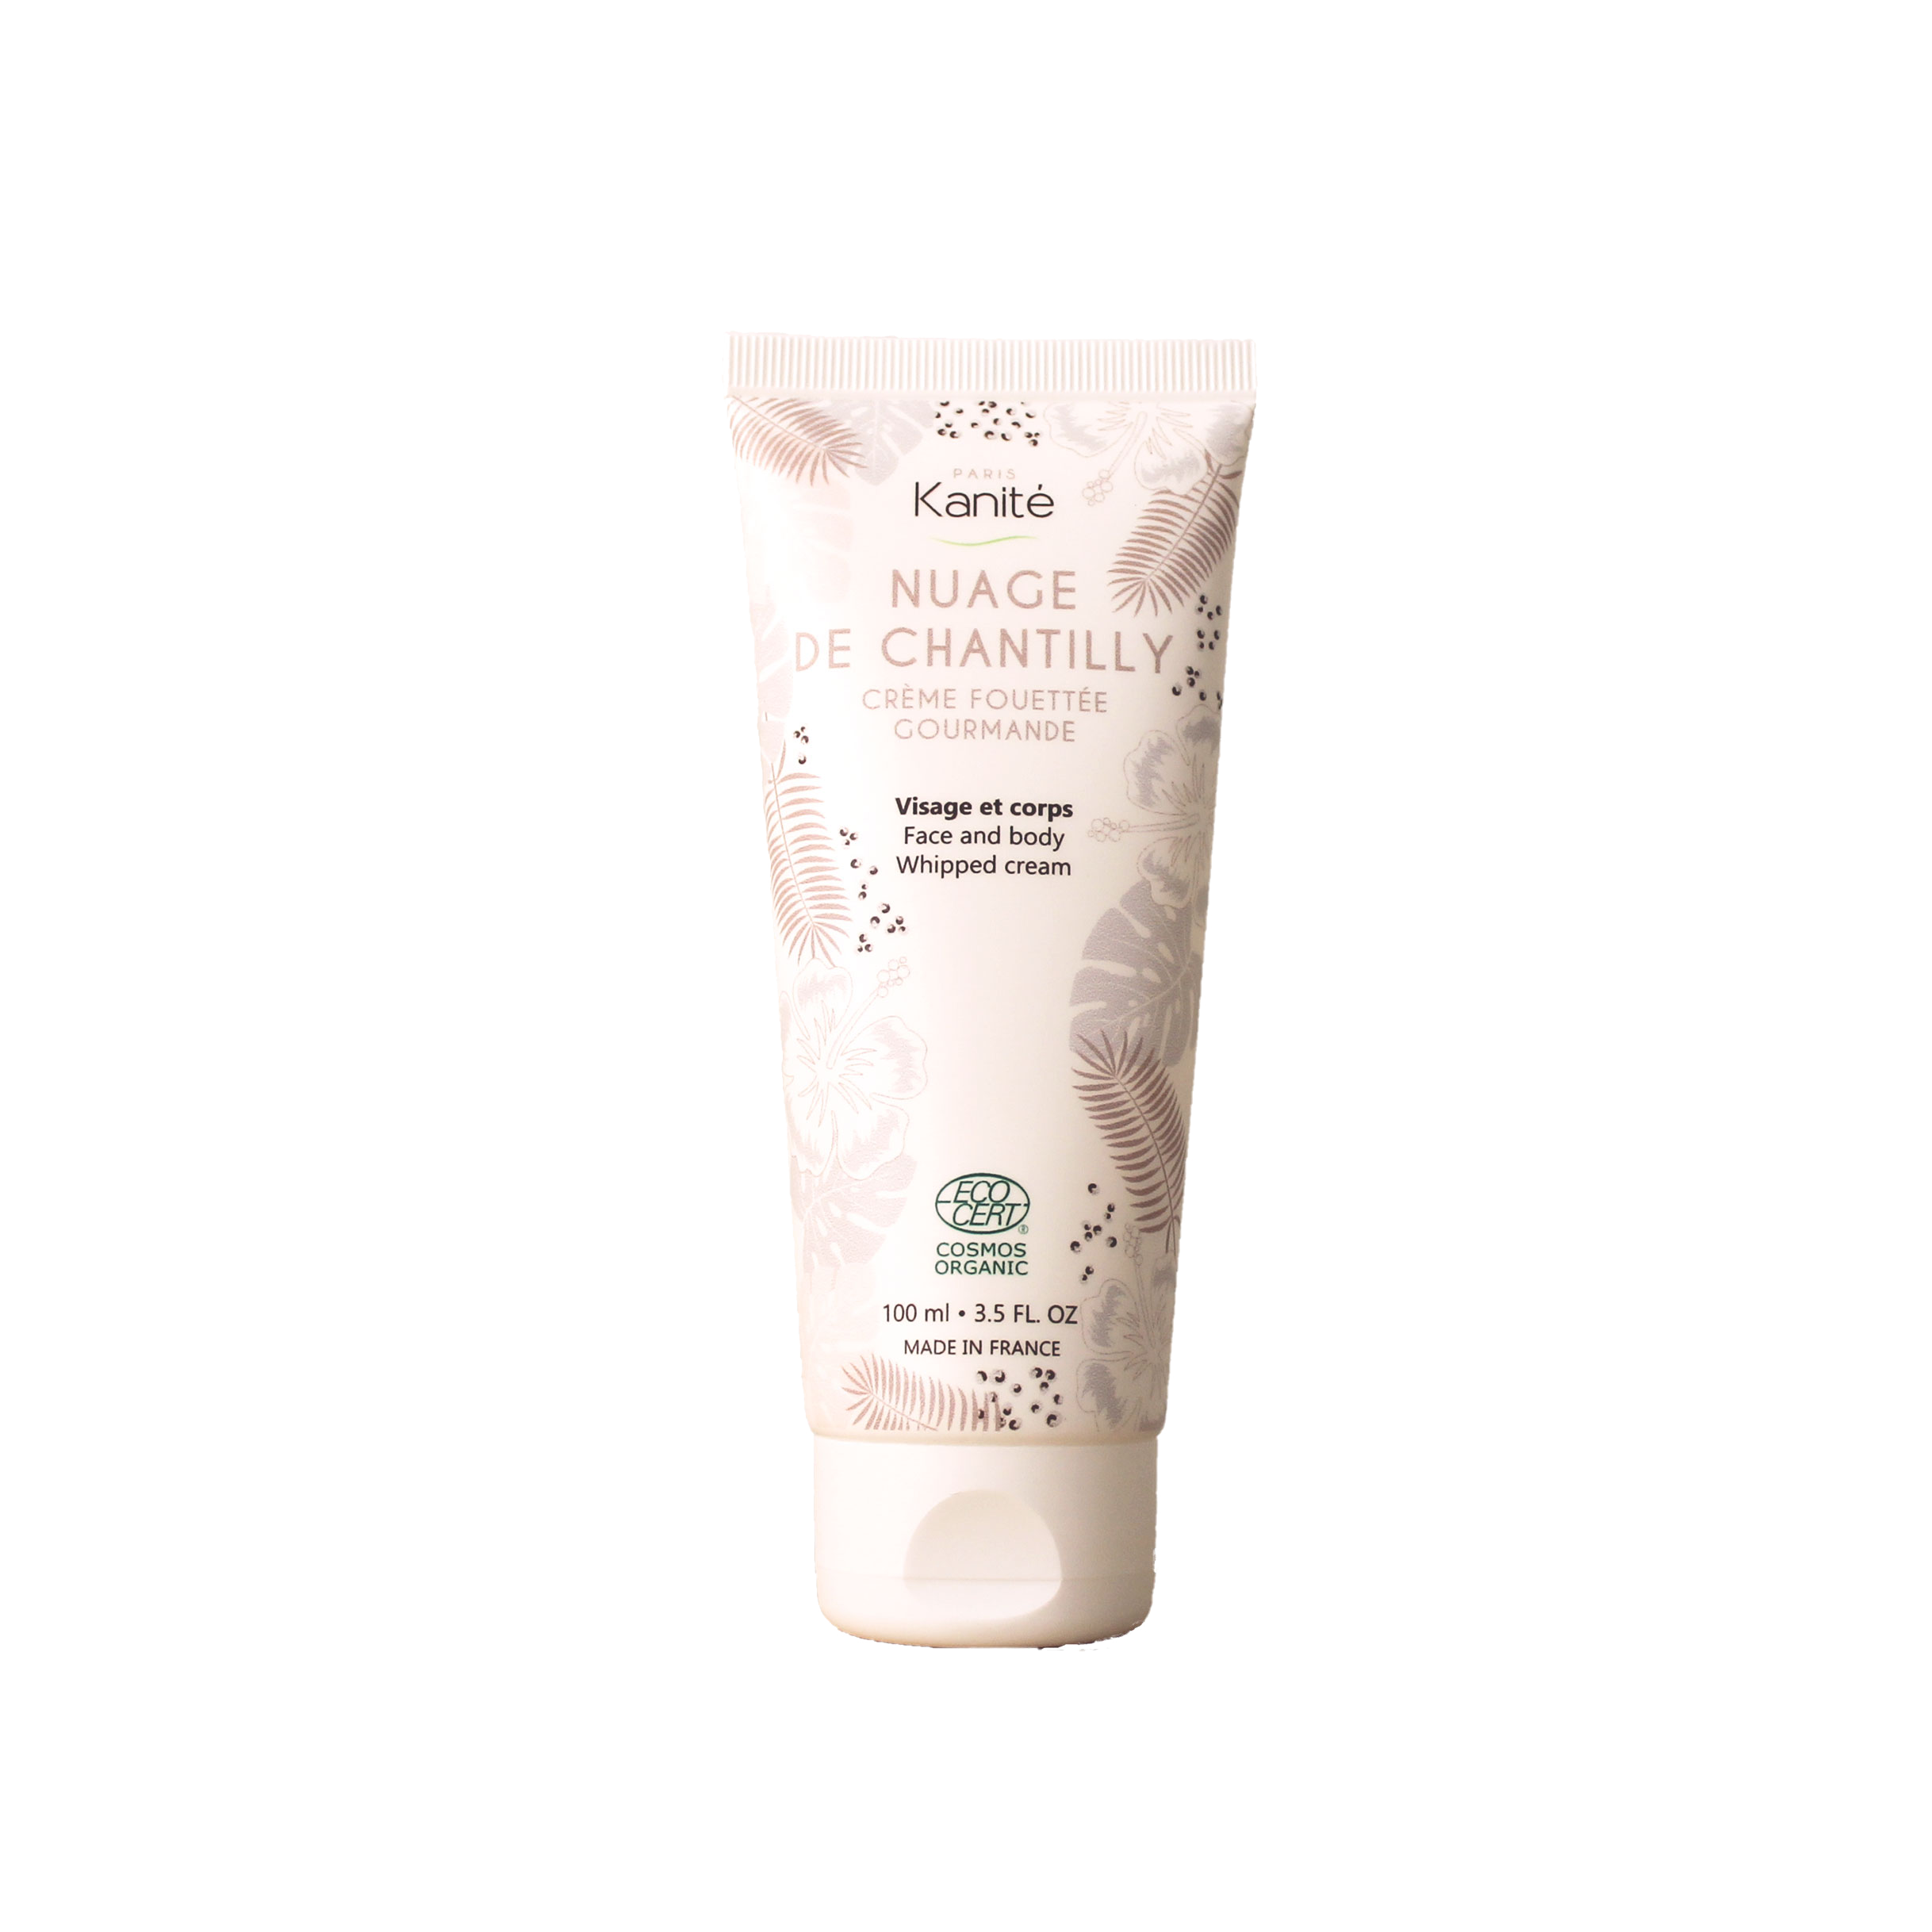 product in tube Nuage de Chantilly 100ml gourmand whipped cream for face and body